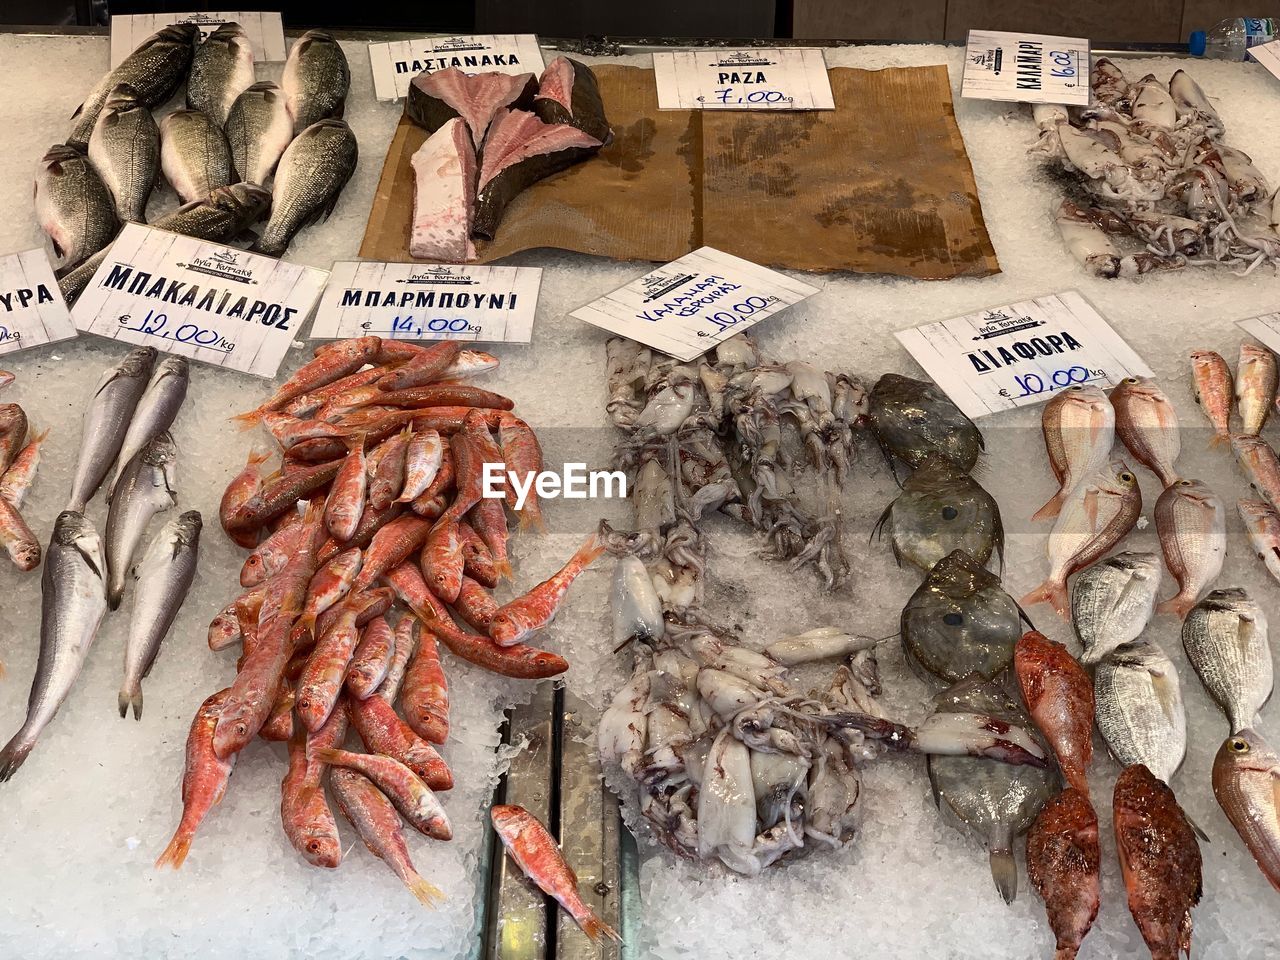 View of fish for sale at market stall